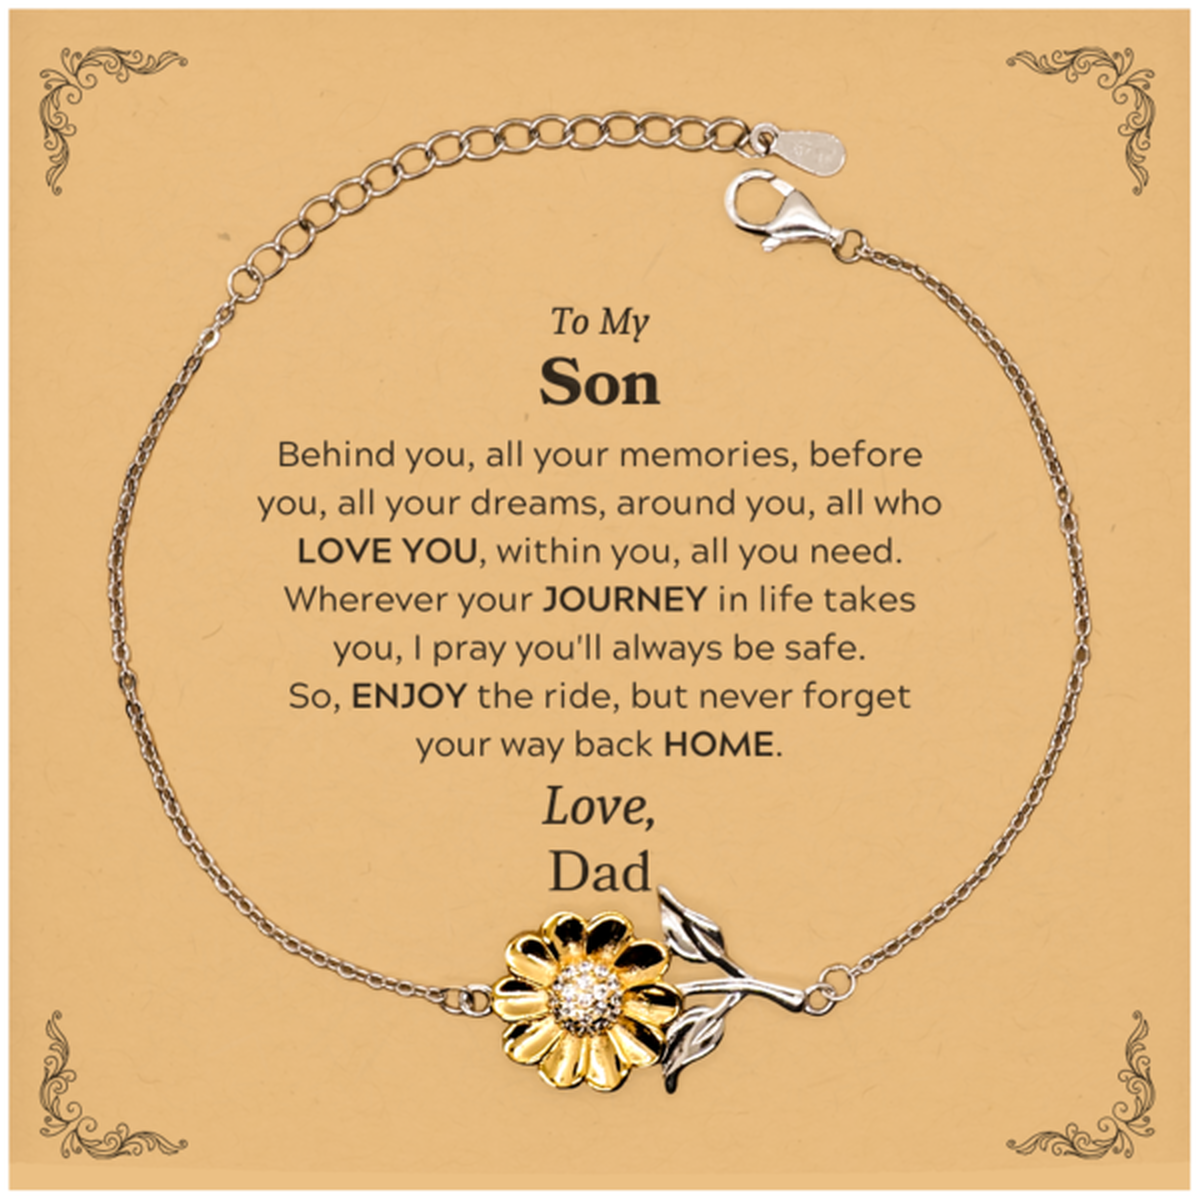 To My Son Graduation Gifts from Dad, Son Sunflower Bracelet Christmas Birthday Gifts for Son Behind you, all your memories, before you, all your dreams. Love, Dad